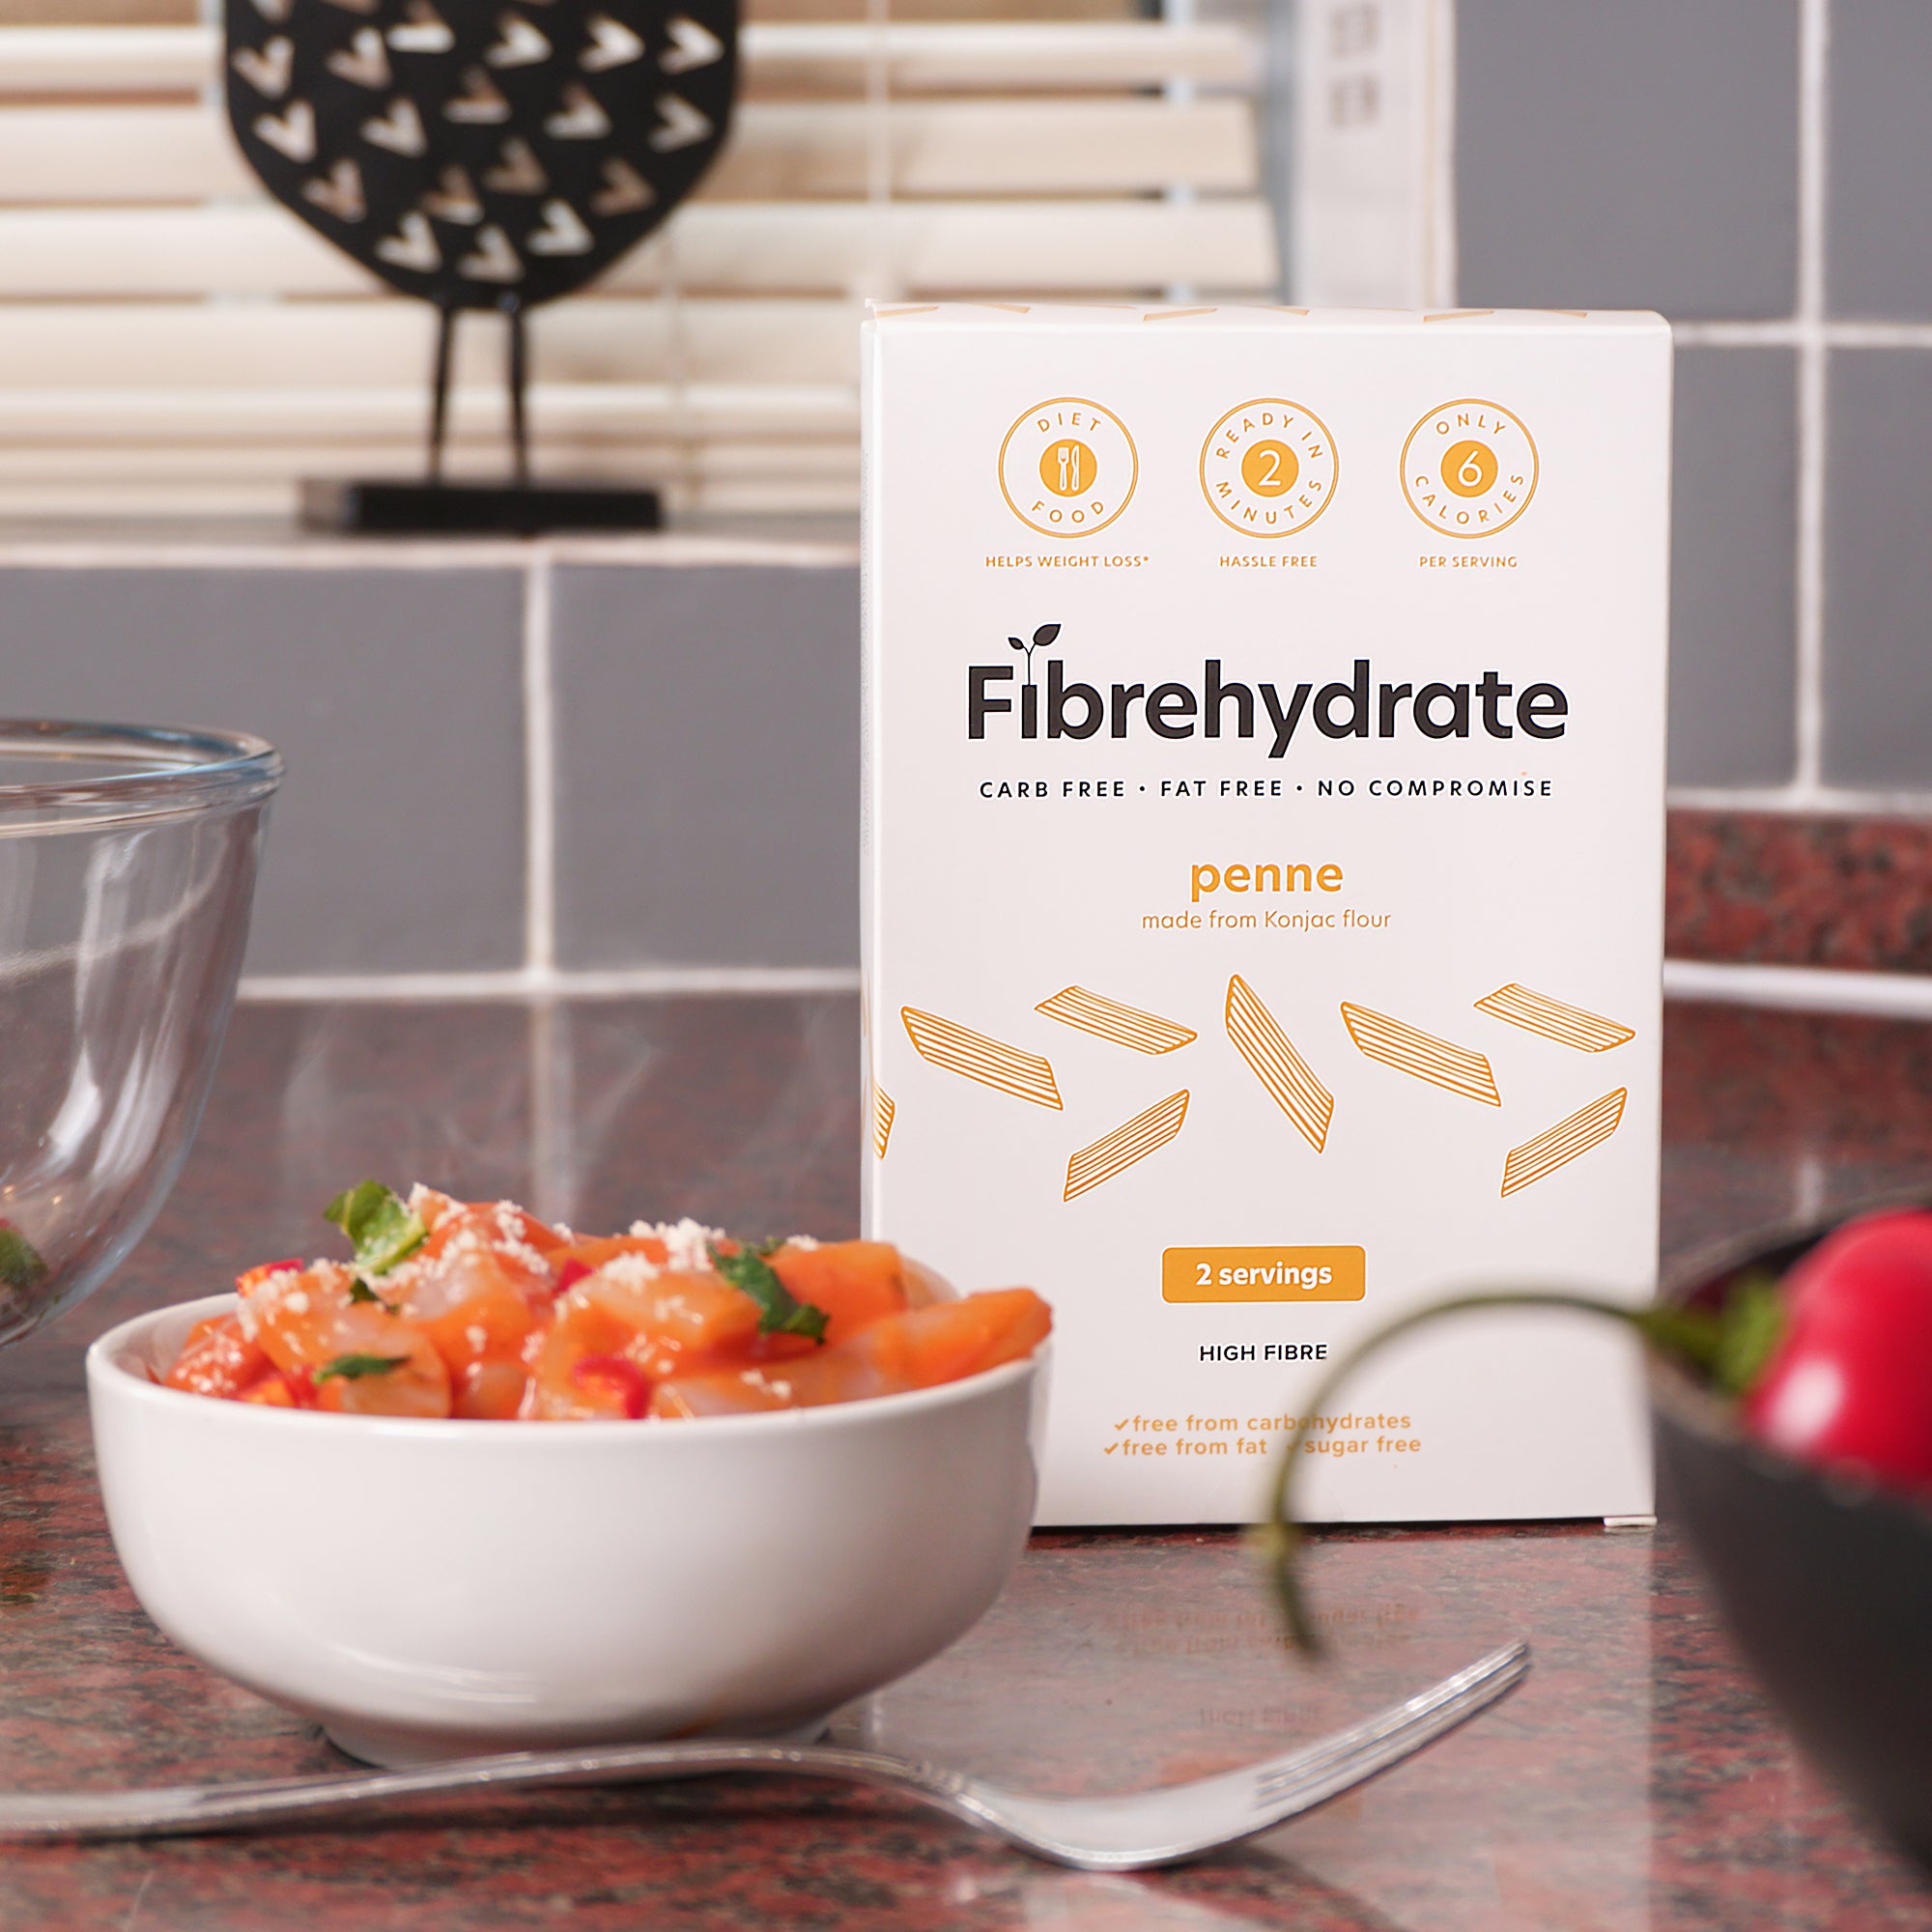 30 for 10 – Fibrehydrate Limited Time Offer